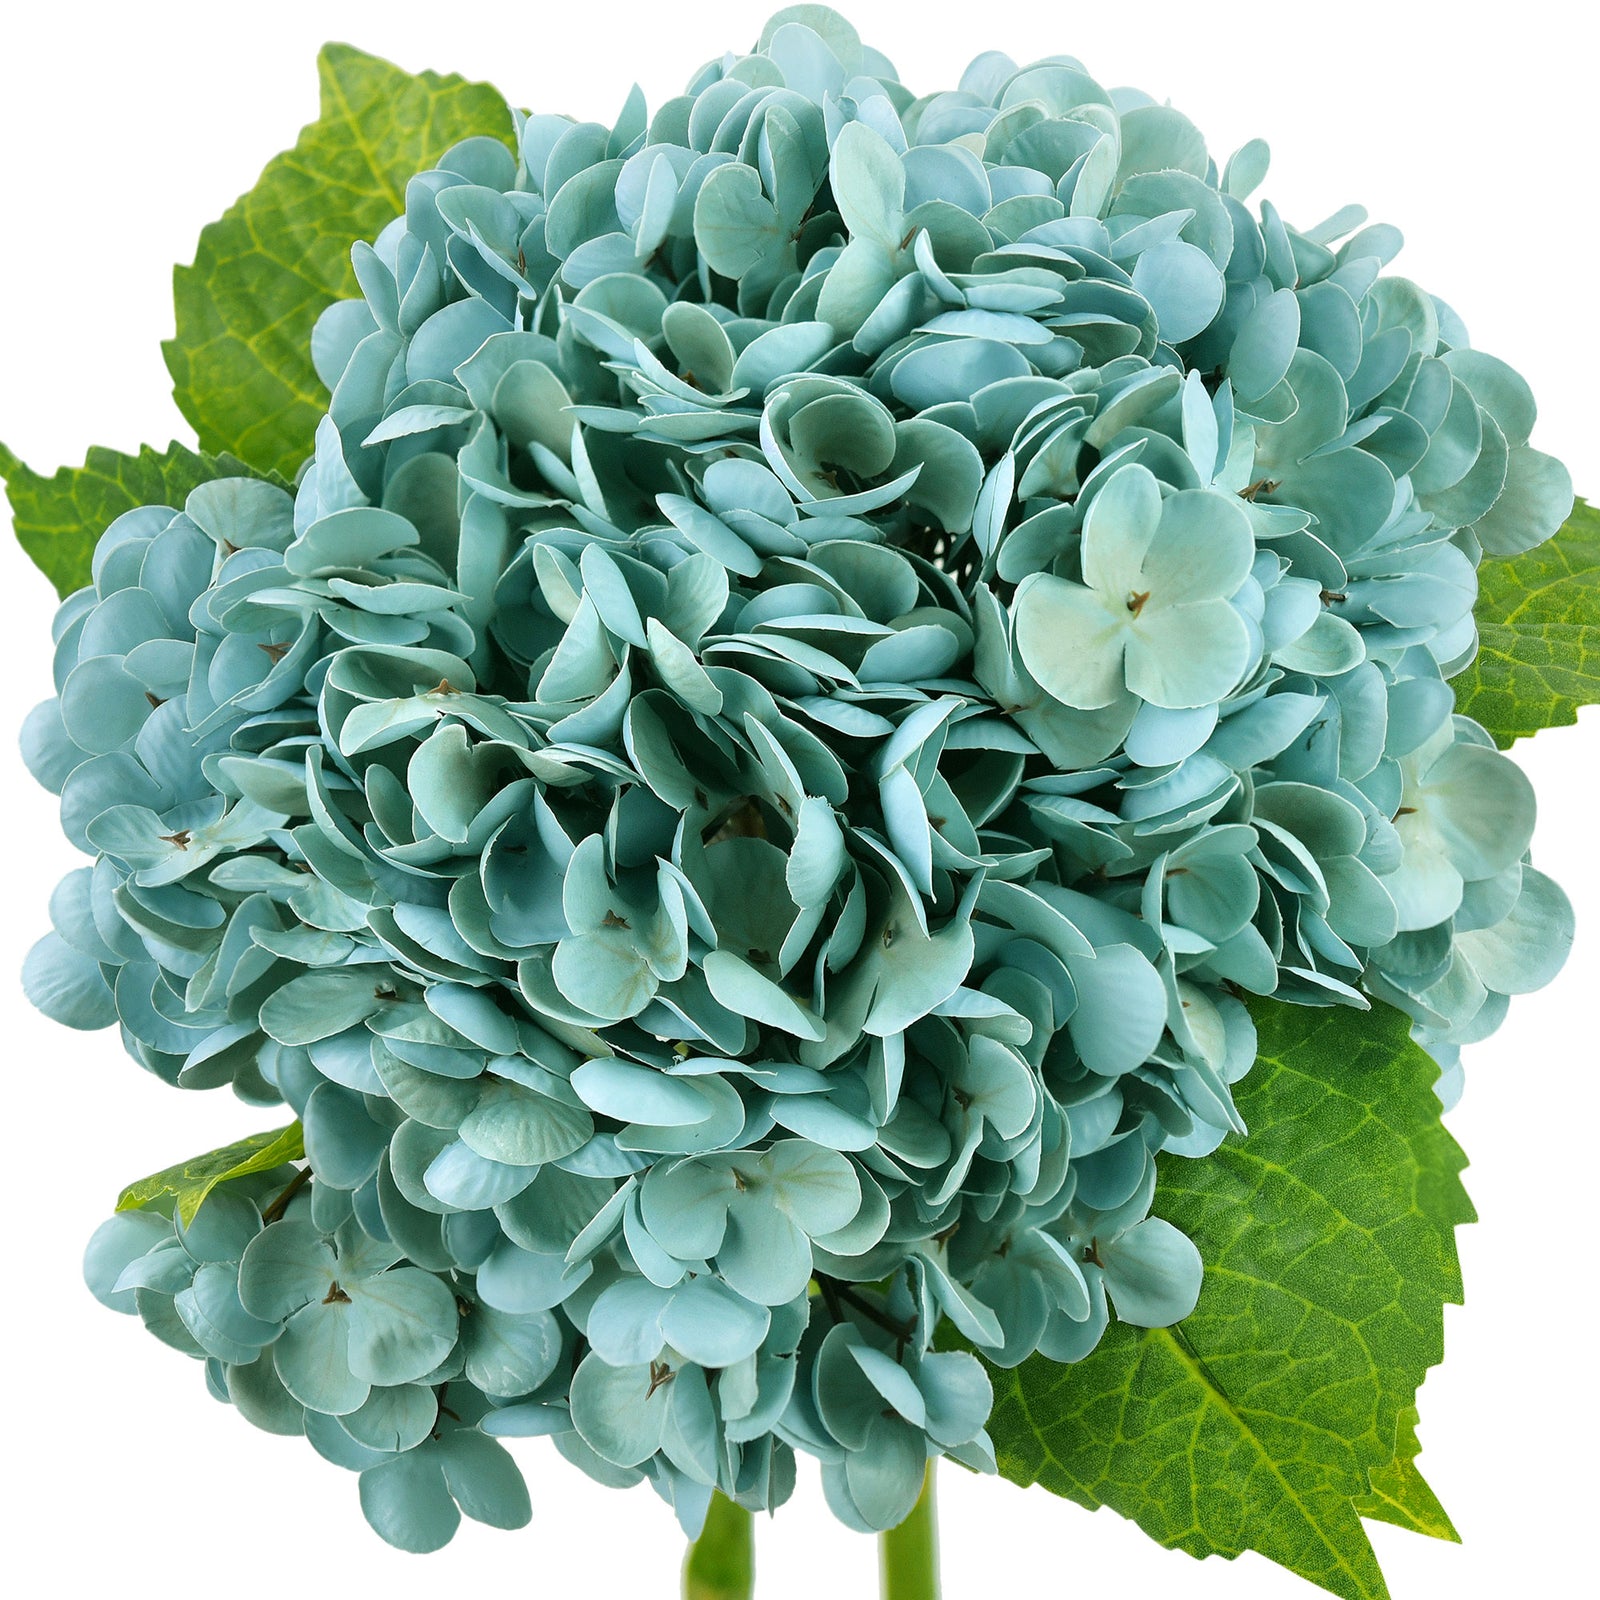 2 Stems Pale Jade Green Real Touch Petals and Leaves Artificial Hydrangea Flowers Long Stem Floral Arrangement | for Wedding Bridal Party Home Décor DIY Floral Decoration